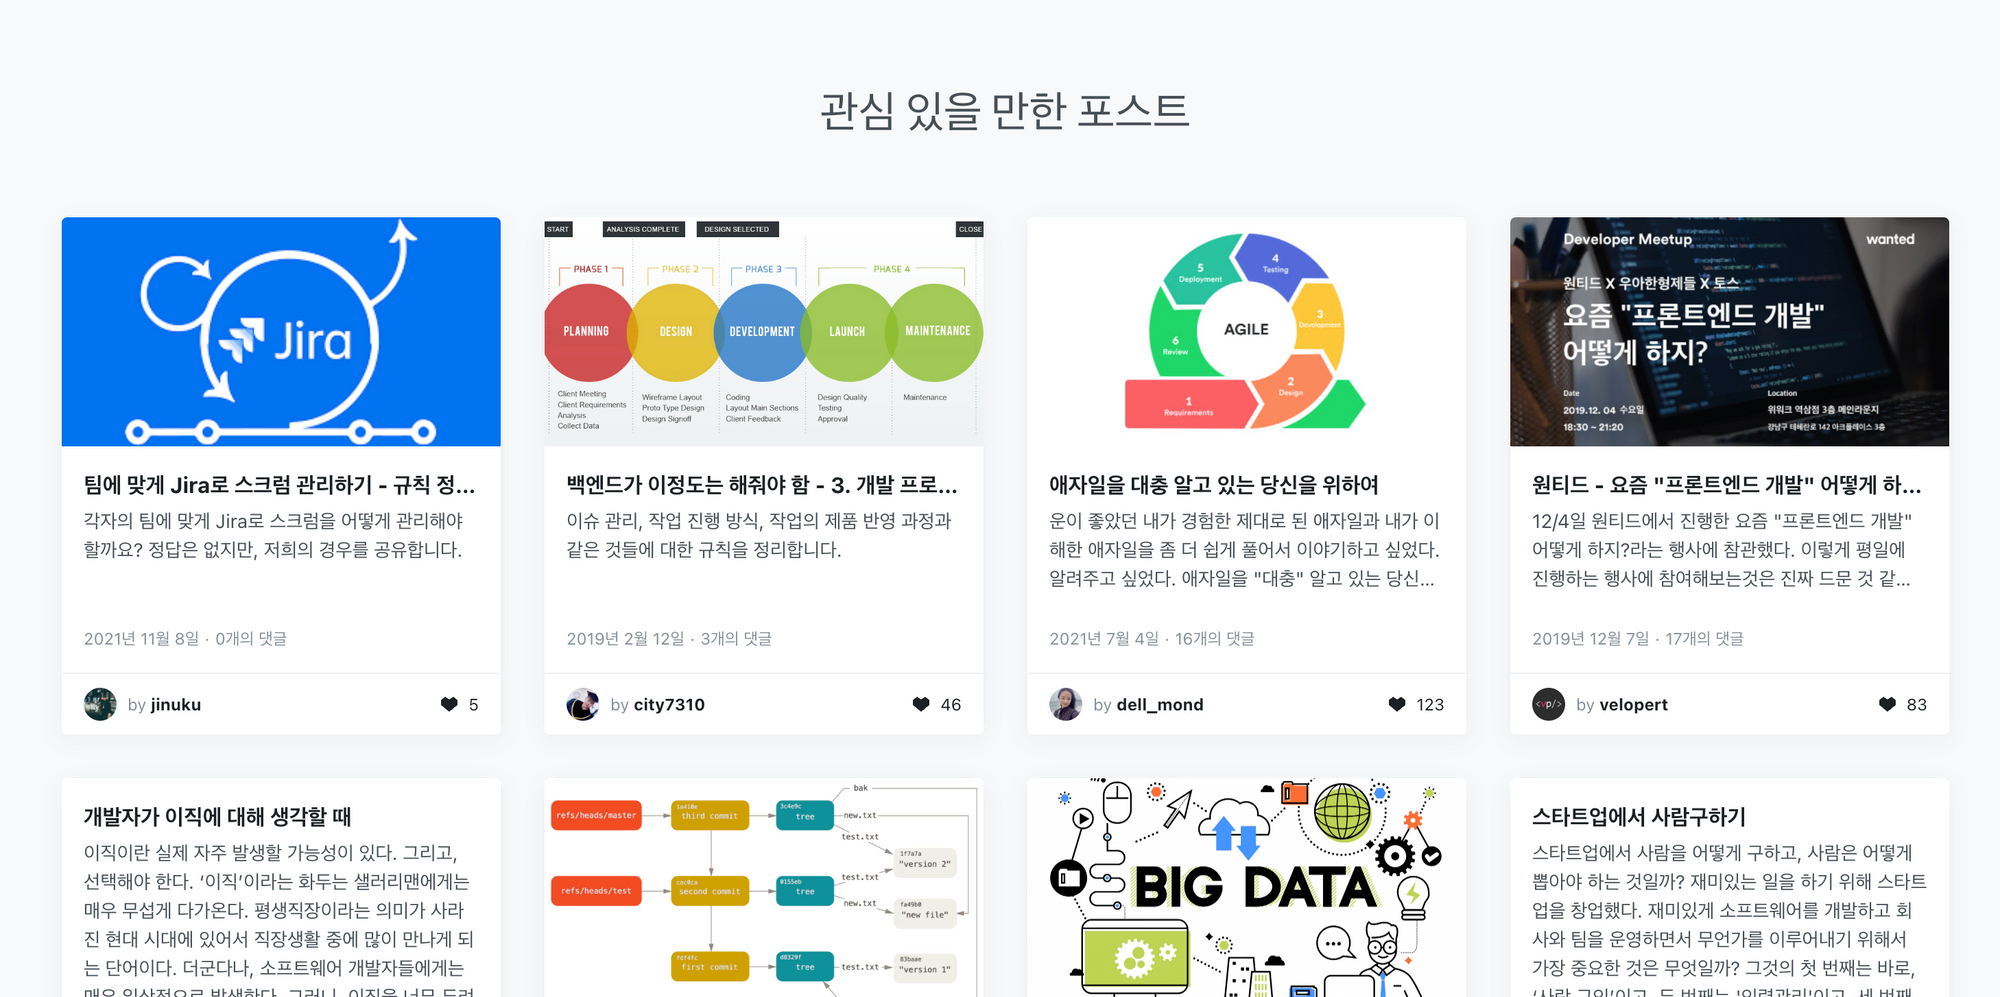 Velog.io, the Korean version of dev.to, links relevant posts for every post.